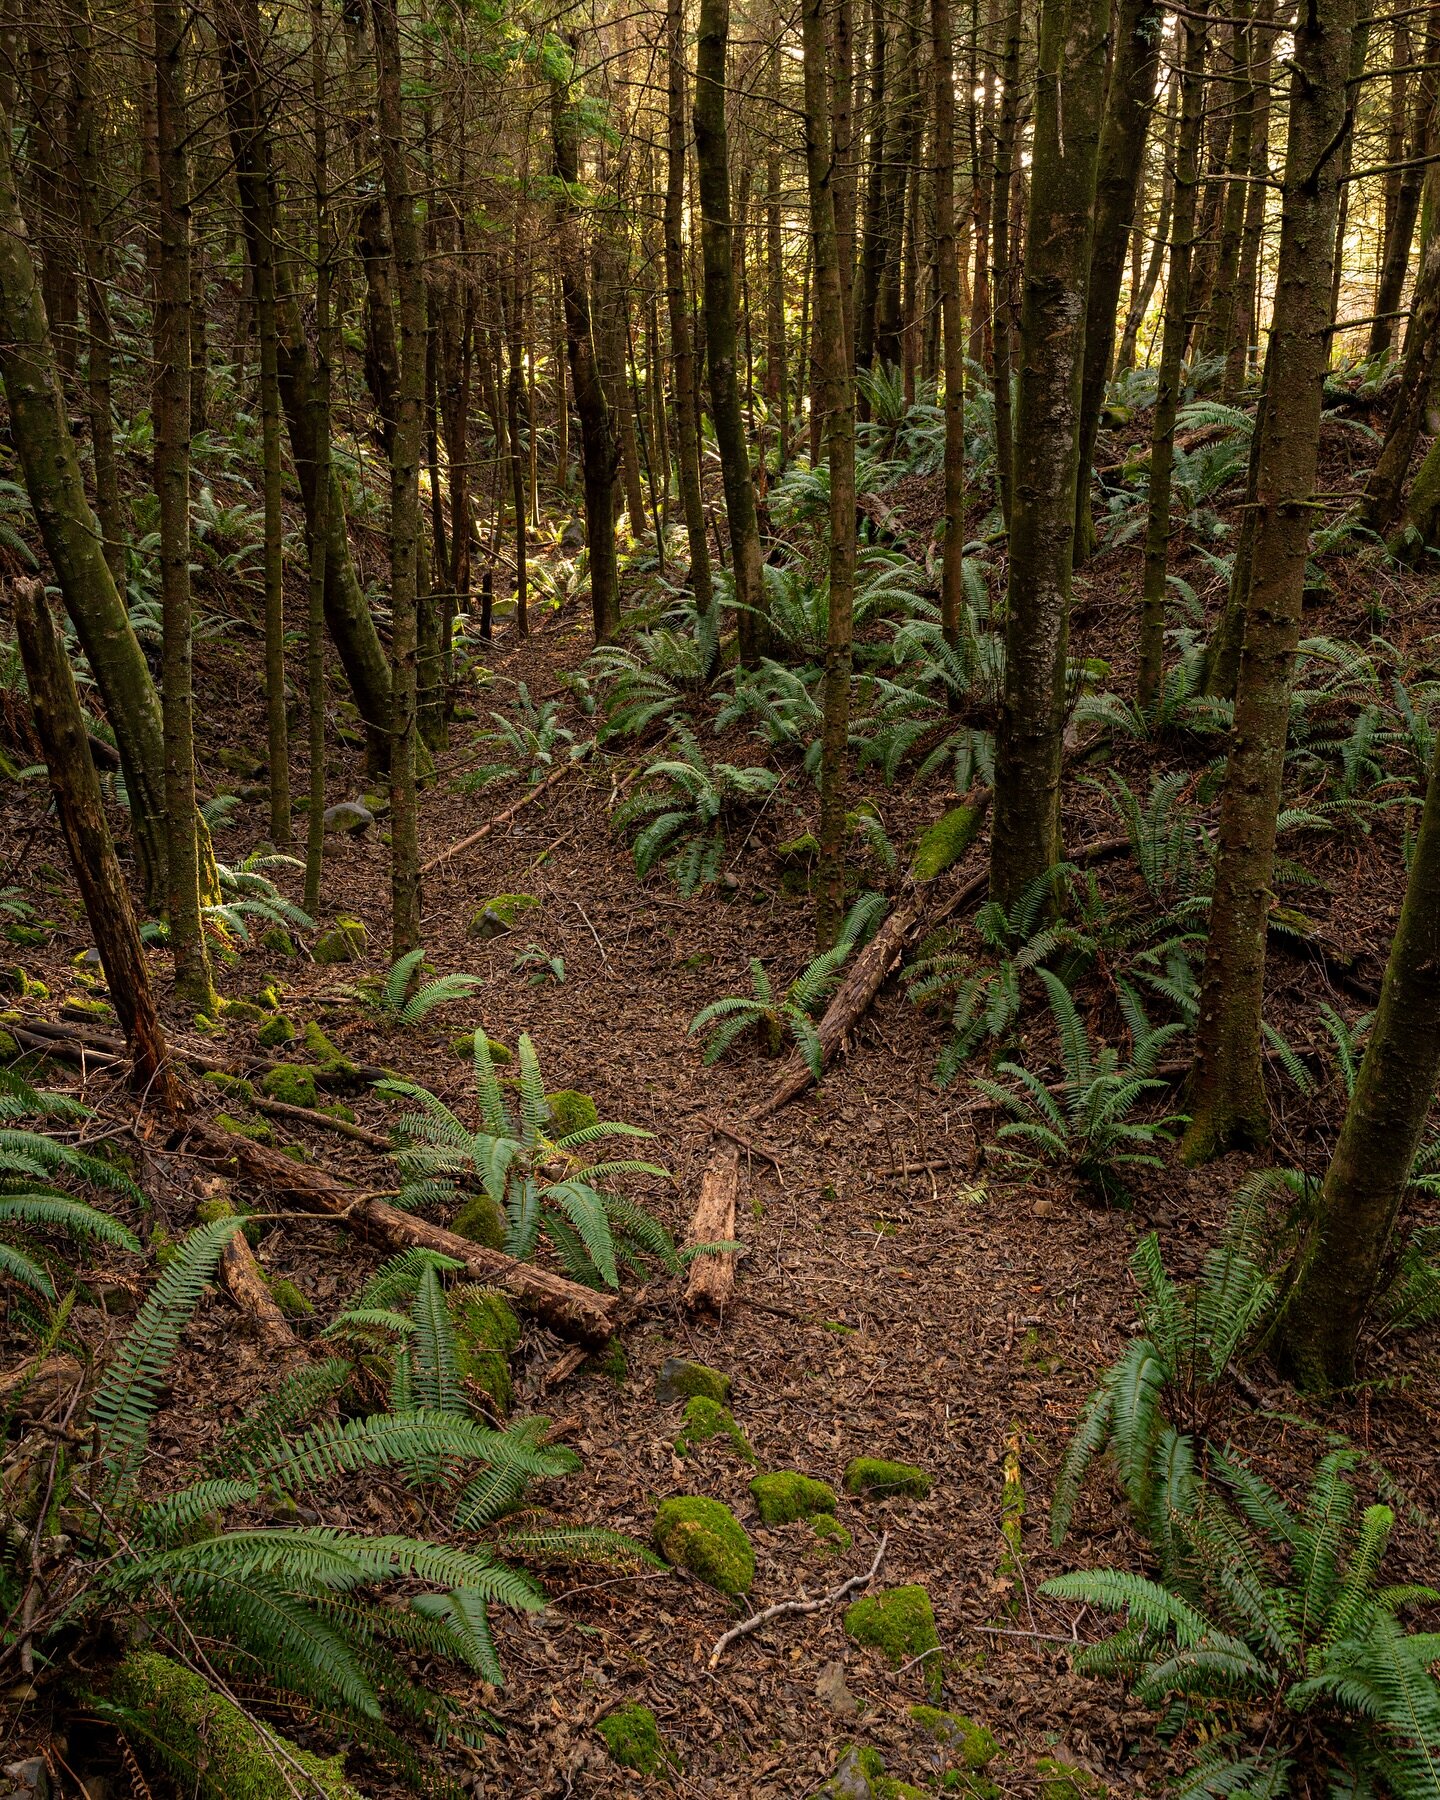 A relaxing forest scene on the northern coast of Oregon! From the December trip with @brianwlackey